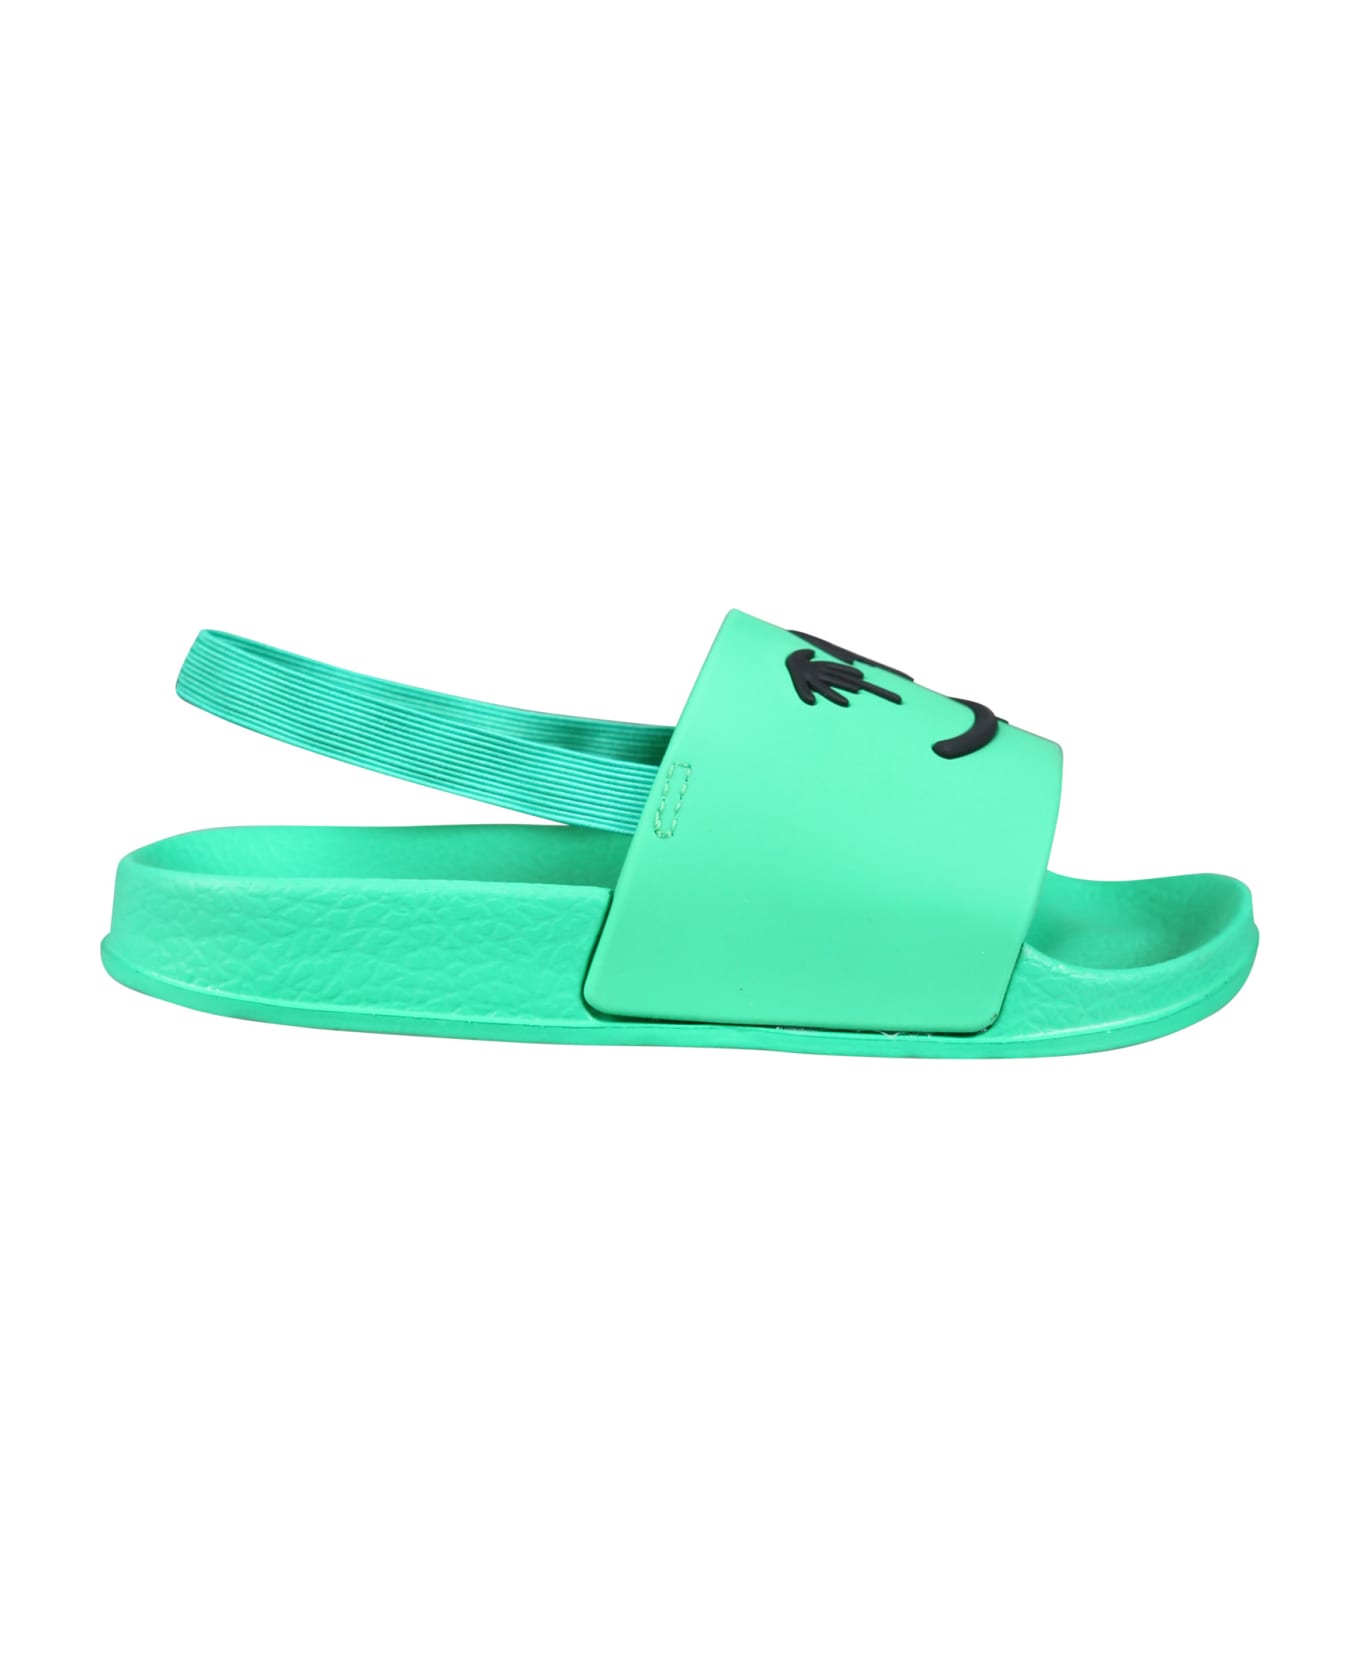 Molo Green Slippers For Kids With Smiley - Green